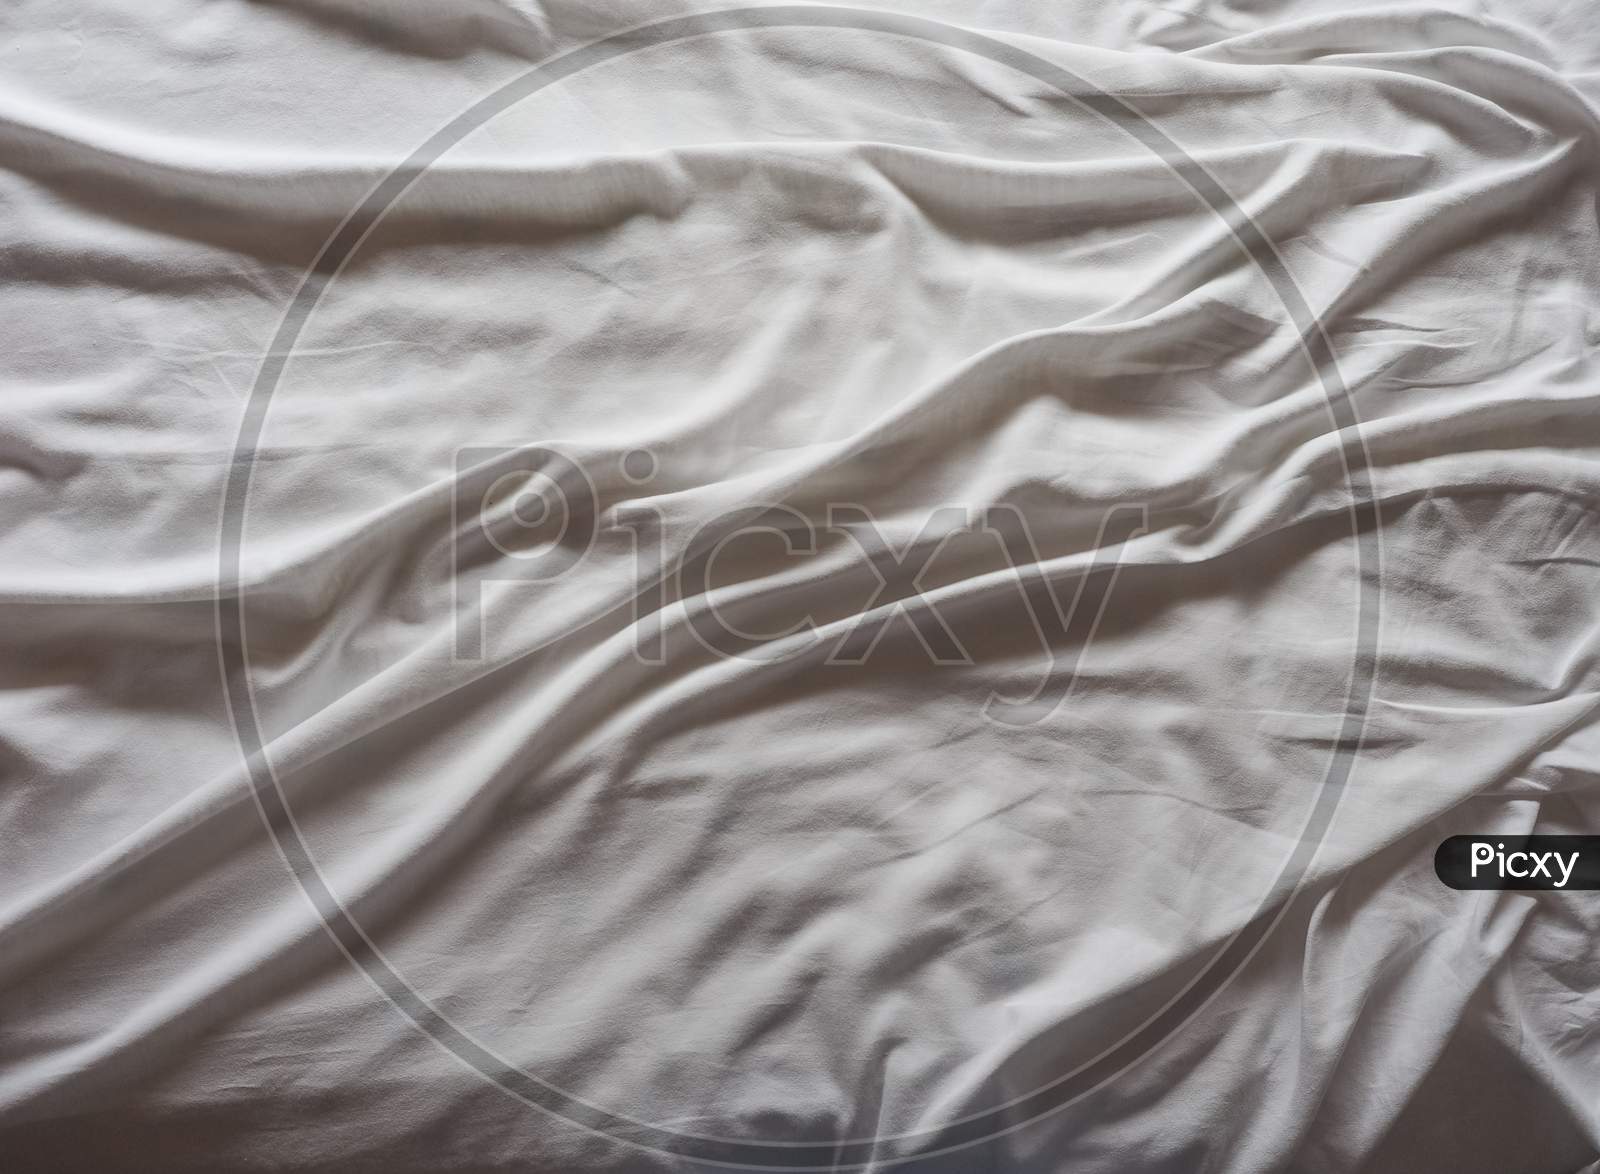 Cotton Sheet On Unmade Bed